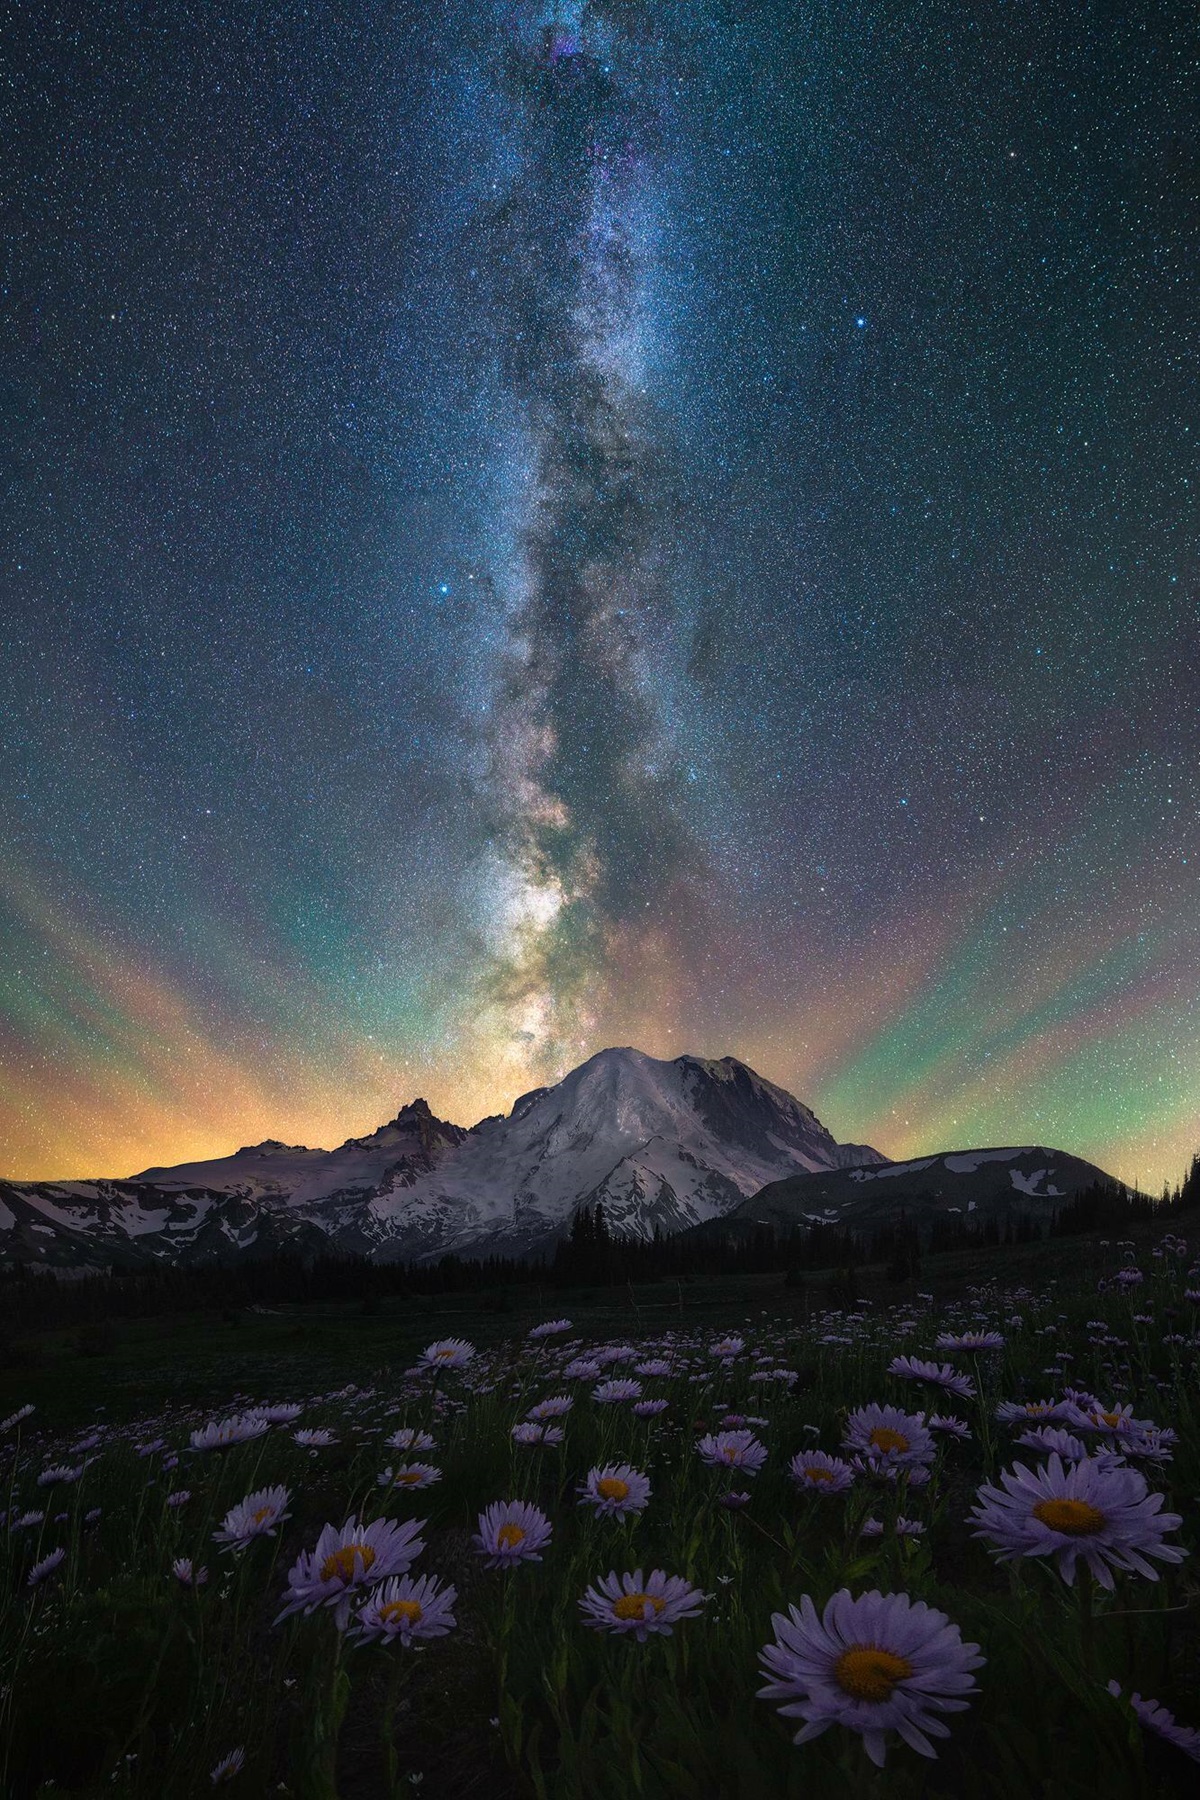 The Night Sky Over Mt Rainier And A Field Of Wildflowers